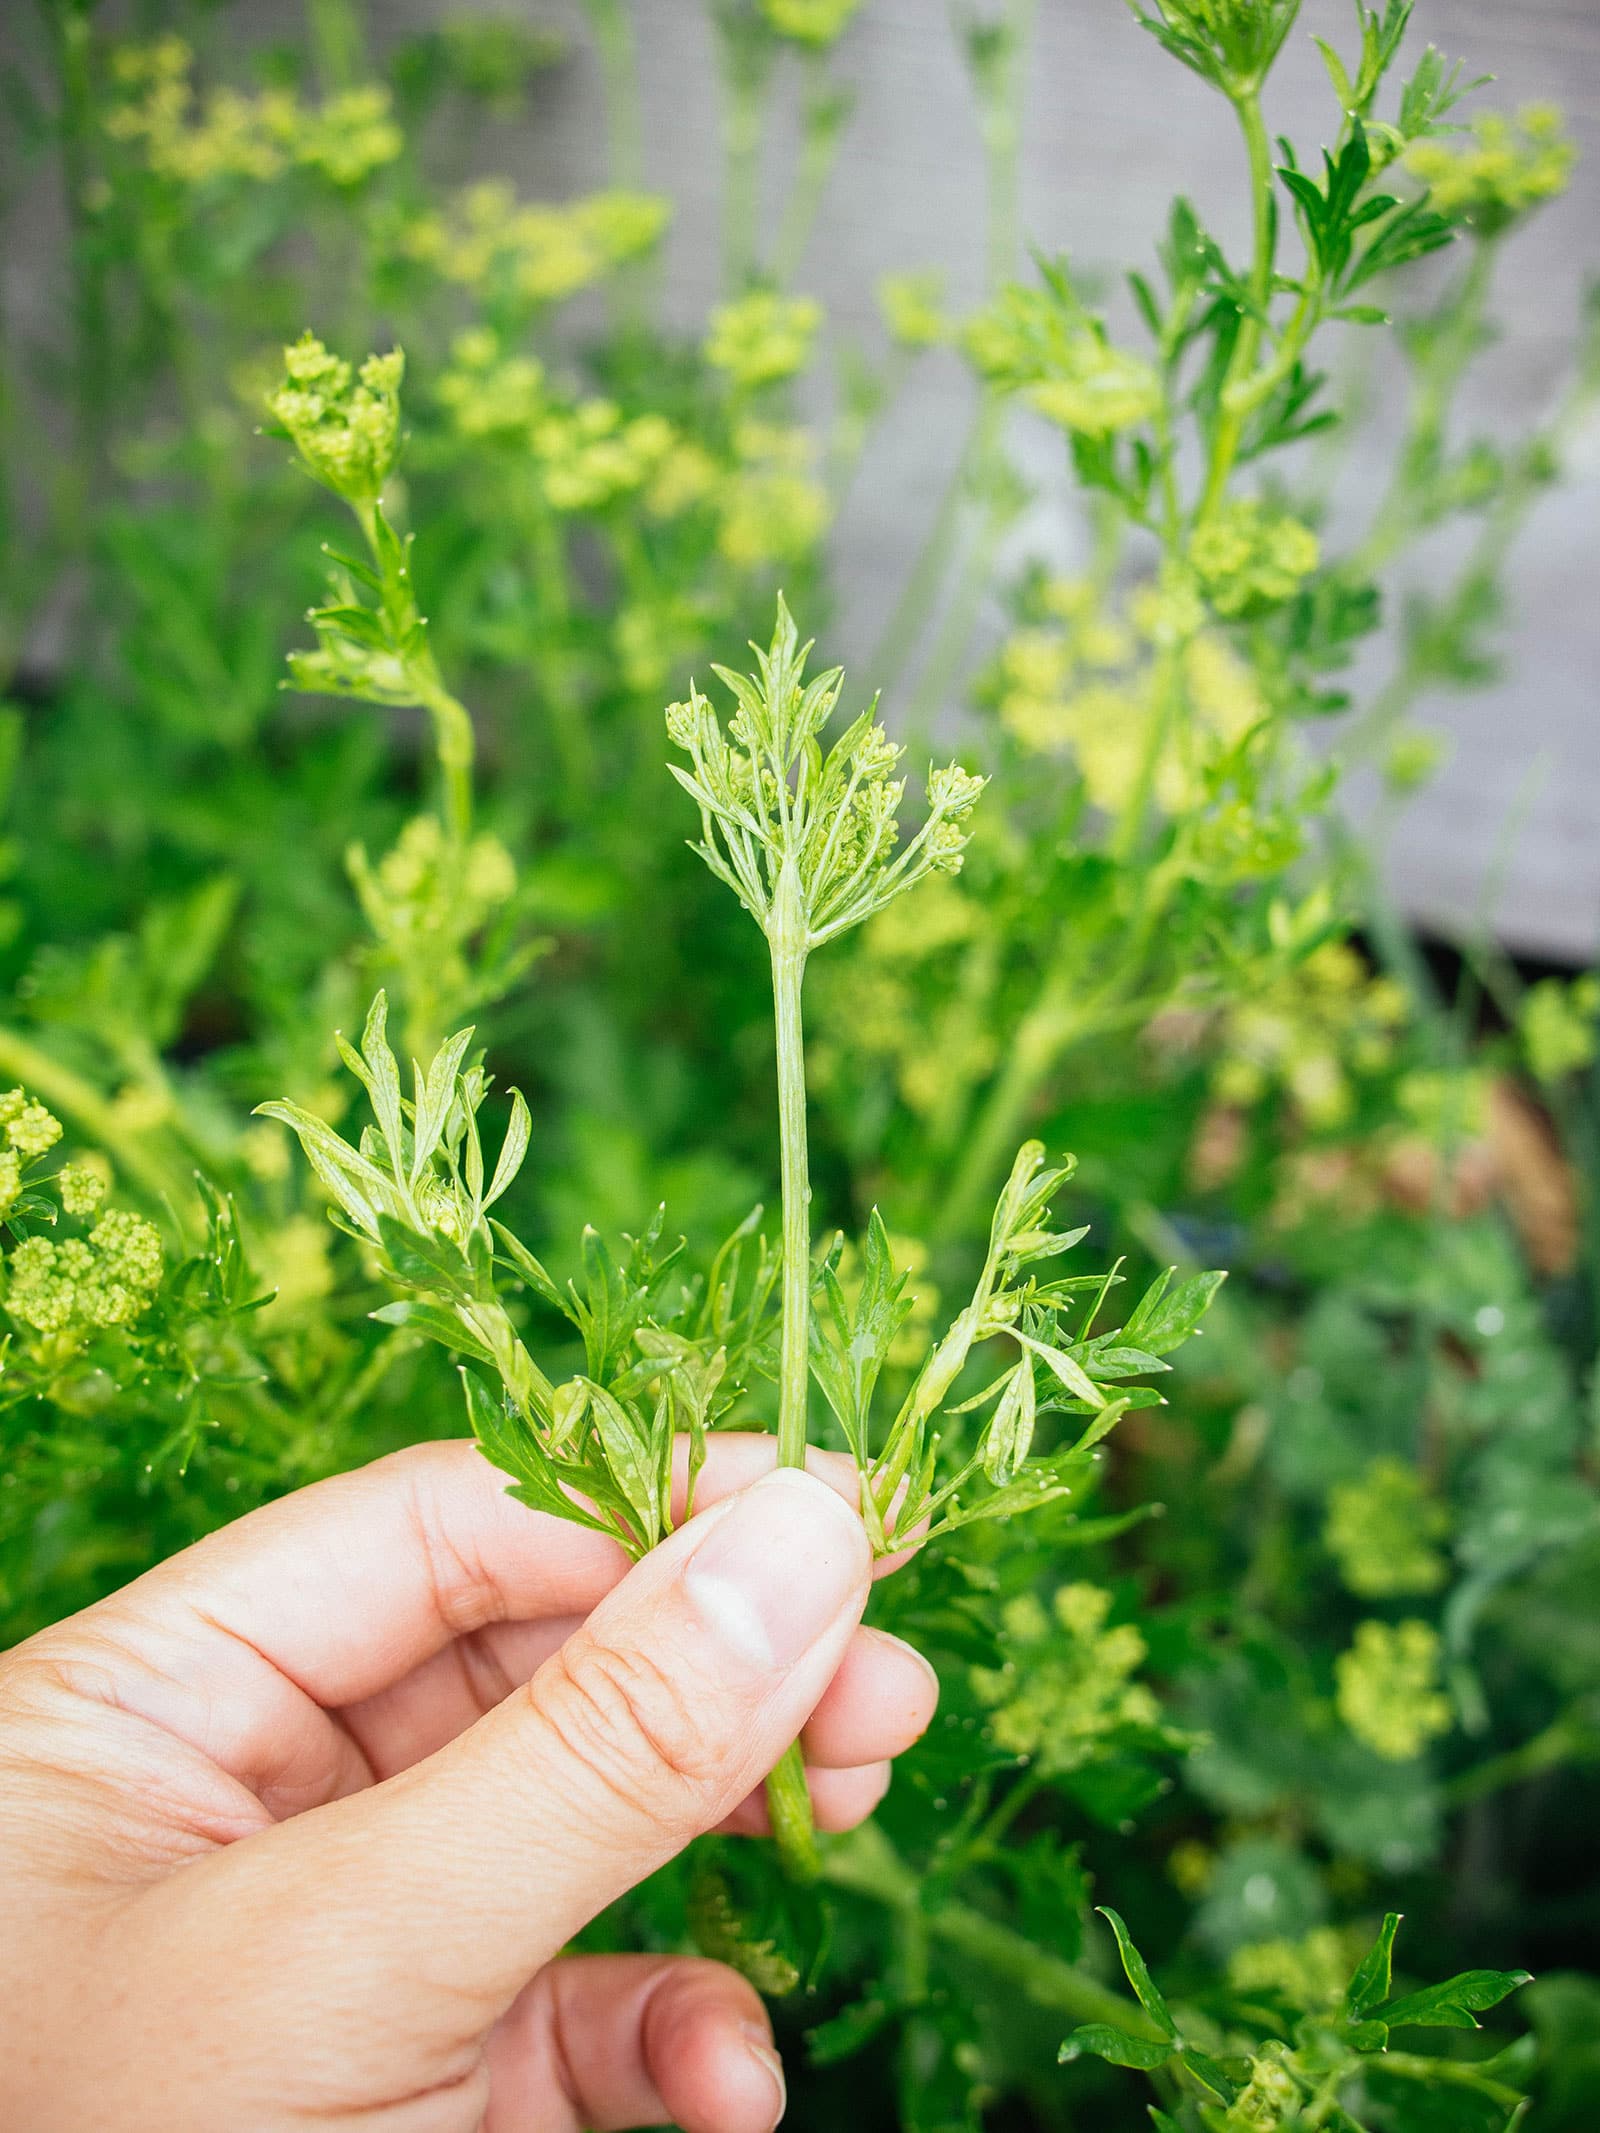 Hand holding a flower stem on a bolted cilantro plant